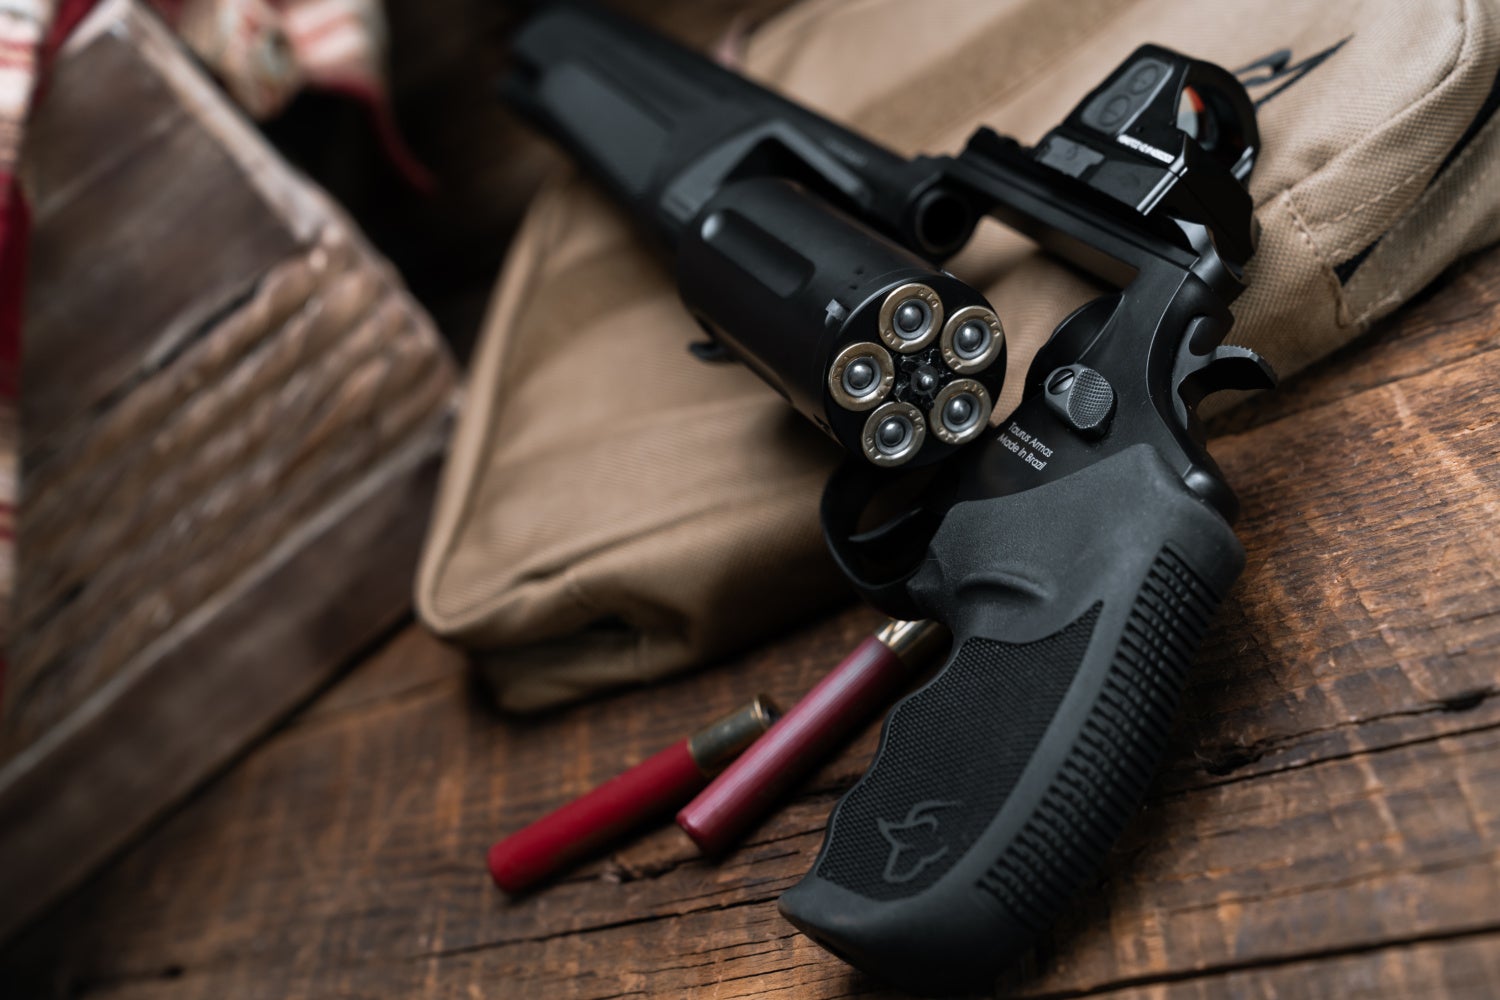 The Judge is Home: Taurus Introduces the New Judge Home Defender